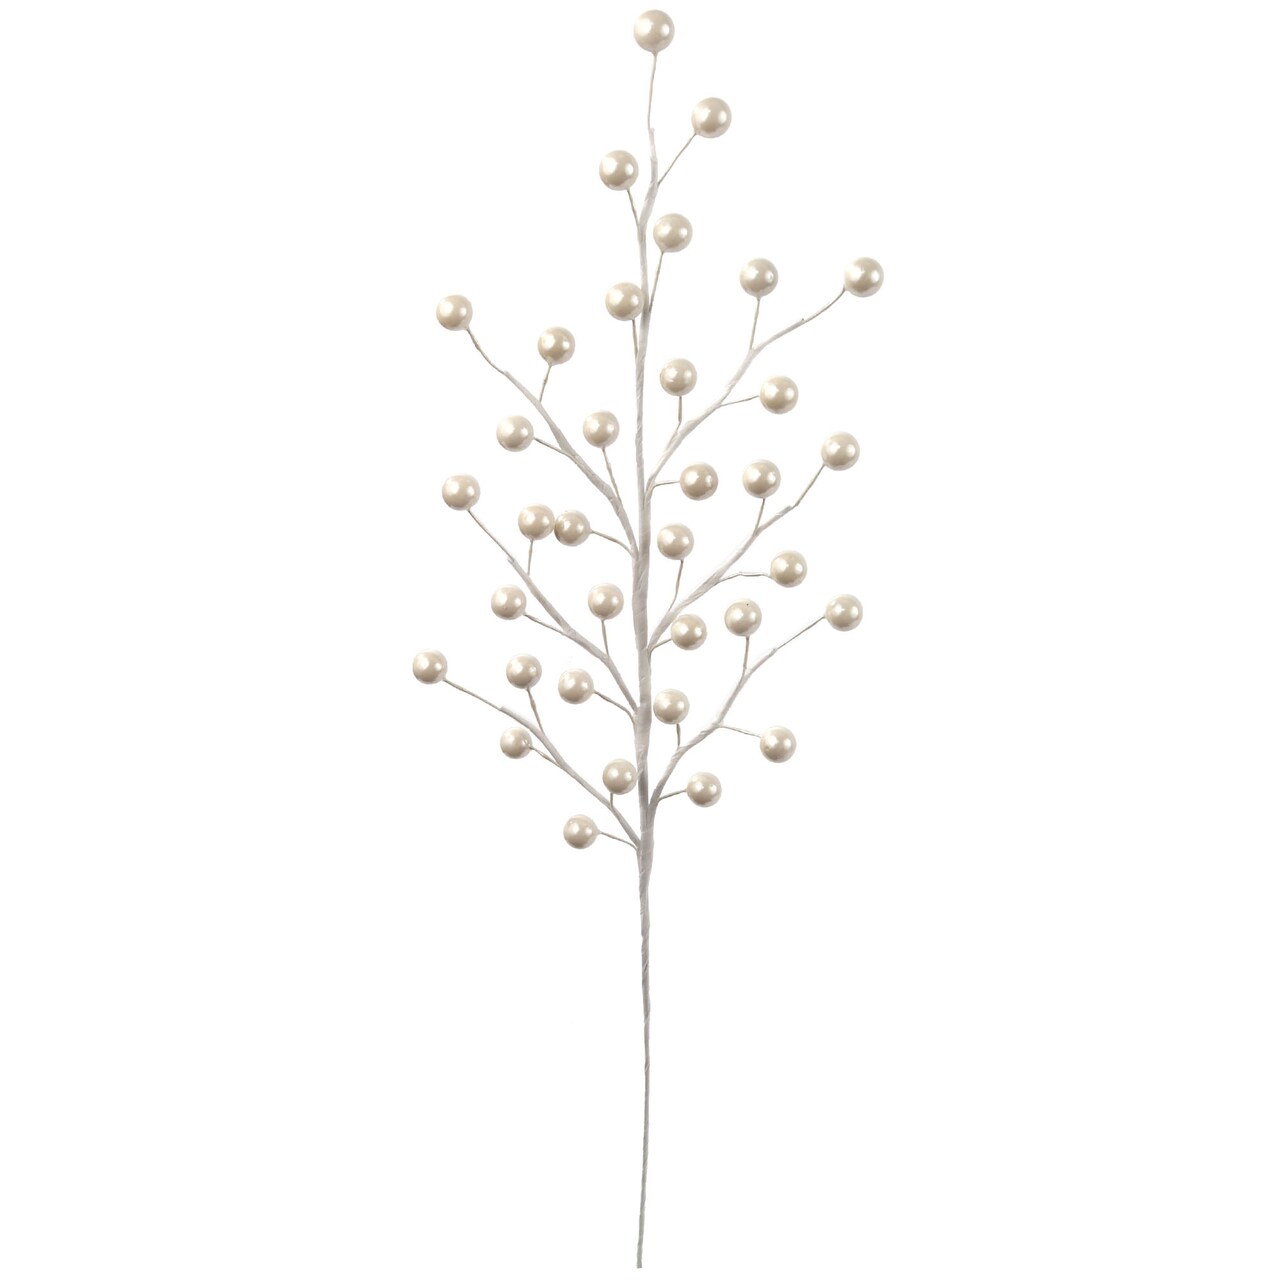 Set of 24: Pearl White Holly Berry Stems with 35 Lifelike Berries, 17-Inch, Festive Holiday Decor, Trees, Wreaths, & Garlands, Christmas Picks, Home & Office Decor